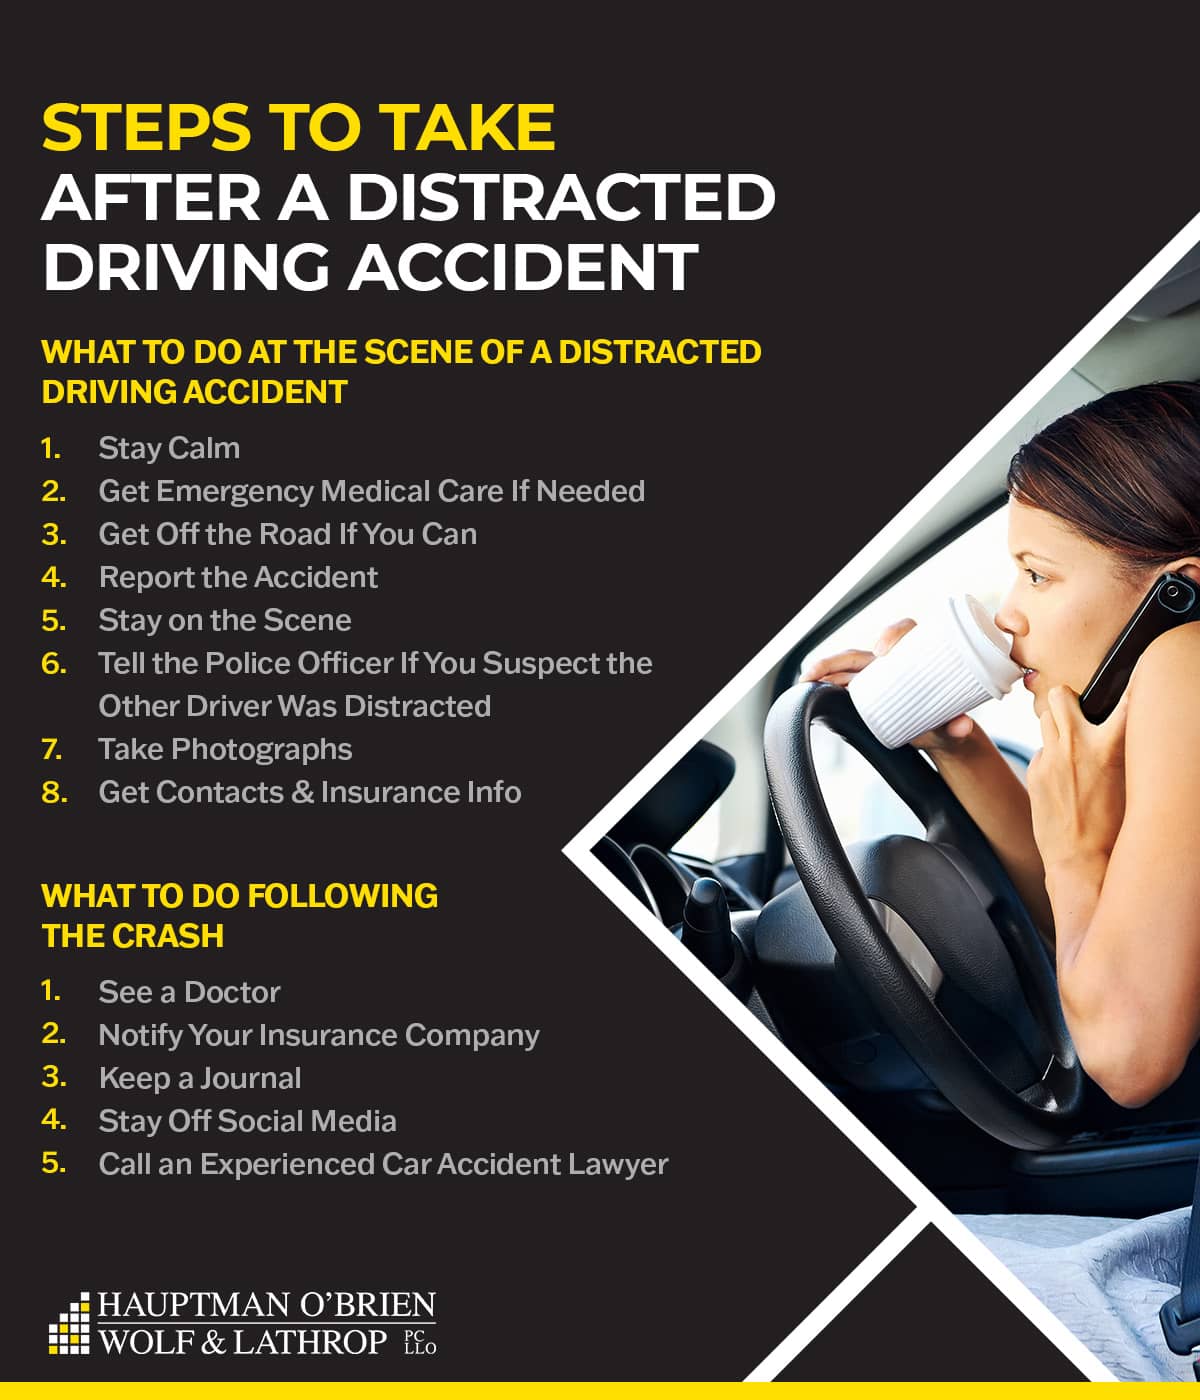 Steps to take after a distracted driving accident | Hauptman, O'Brien, Wolf & Lathrop